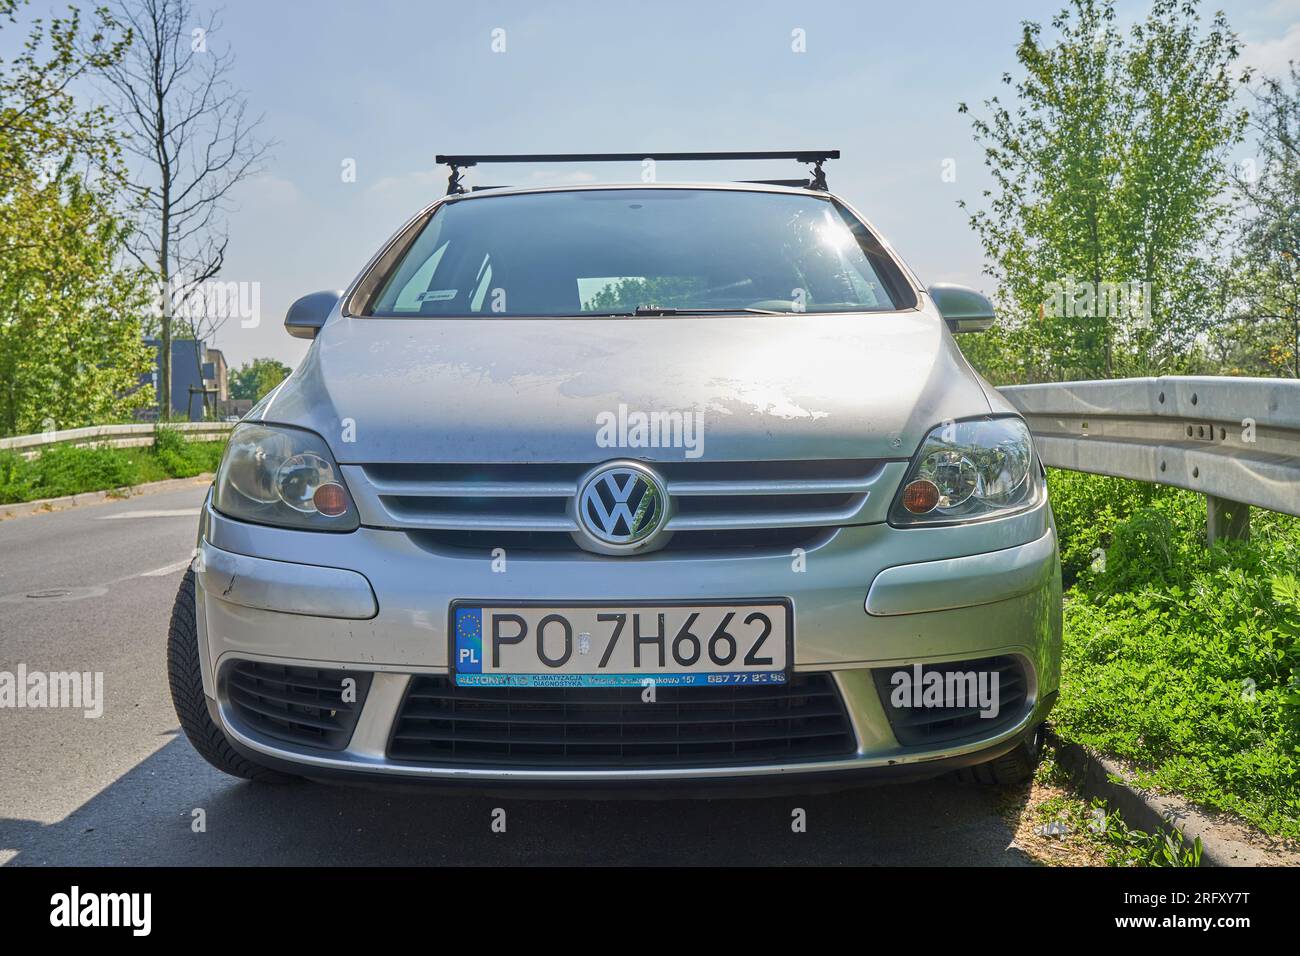 Poznan, Poland - April 2, 2023: A parked silver Volkswagen Golf Plus from 2006 on a road. Stock Photo